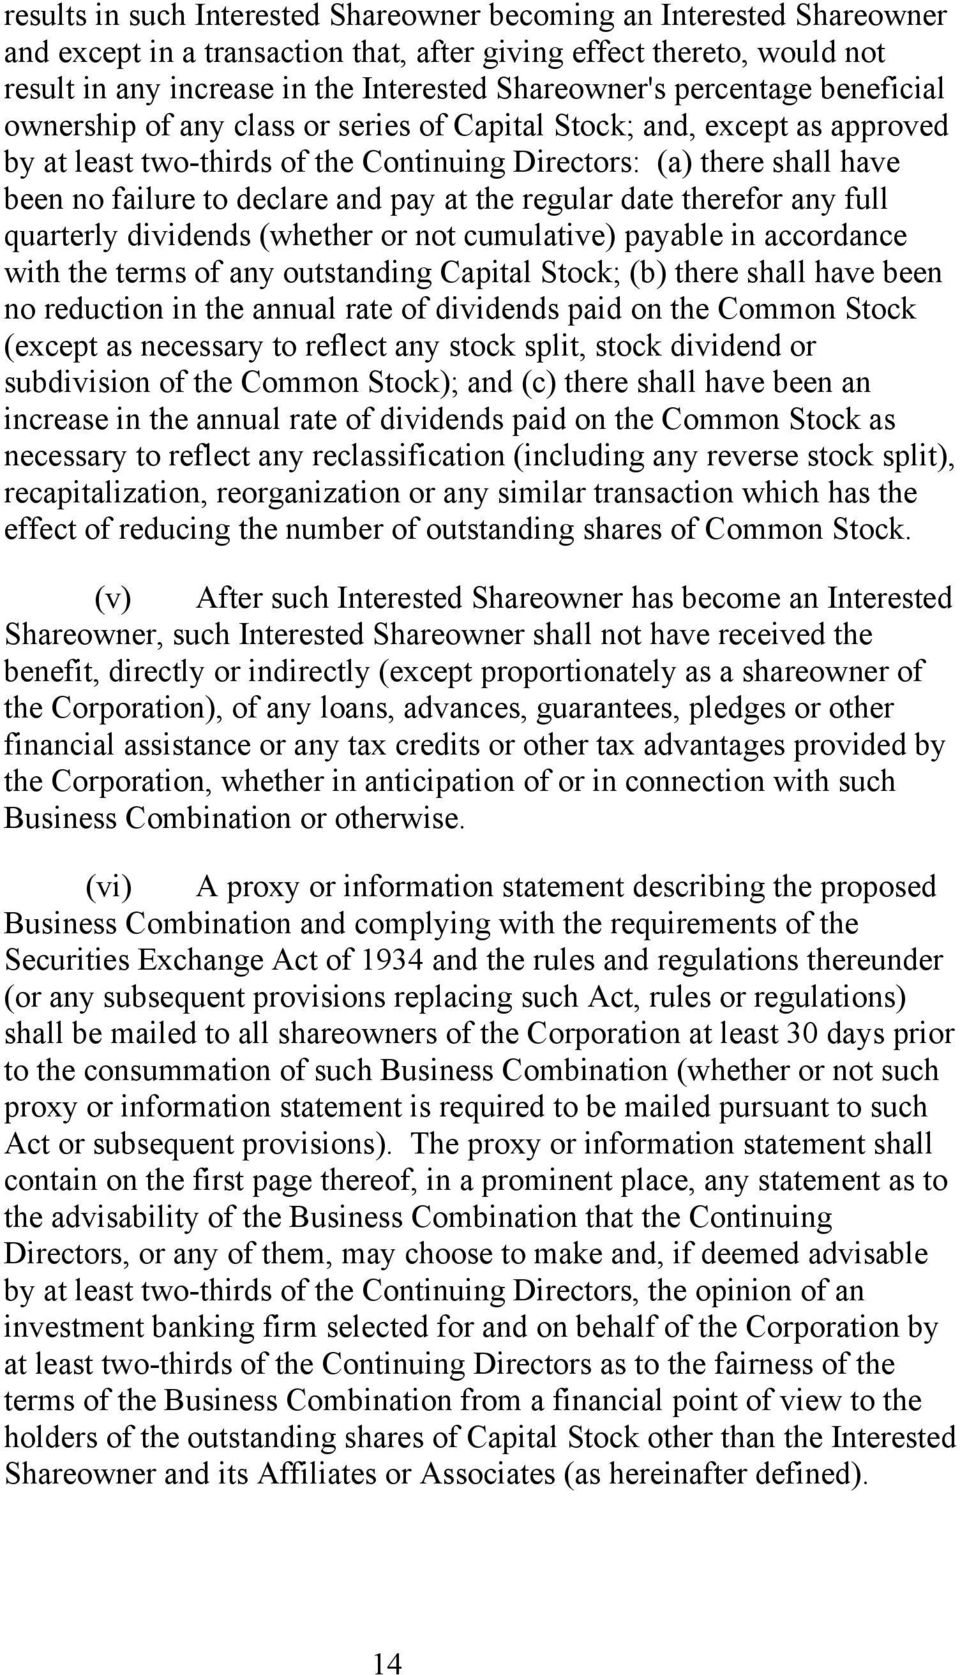 and pay at the regular date therefor any full quarterly dividends (whether or not cumulative) payable in accordance with the terms of any outstanding Capital Stock; (b) there shall have been no